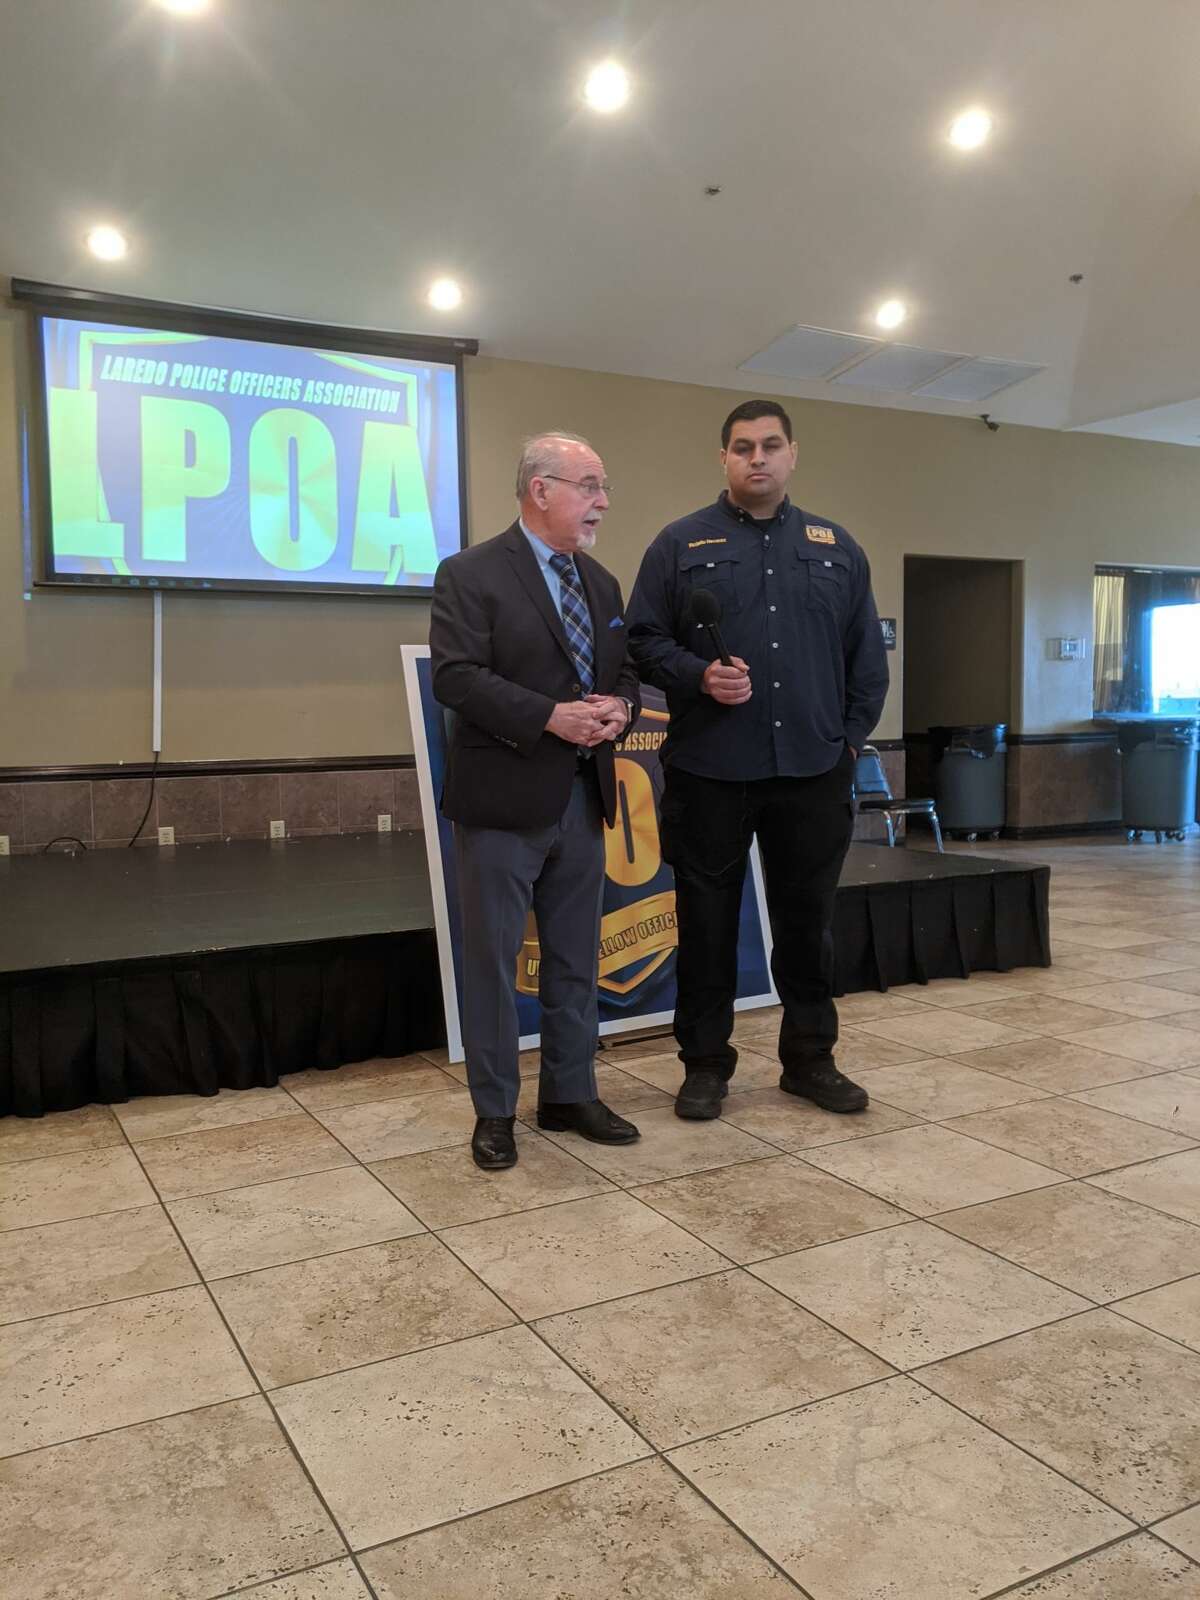 CLEAT Executive Director Charley Wilkinson speaks alongside LPOA President Rojelio Nevarez at a press conference Tuesday denouncing the release of suspected shooter Cesar Rene Terrazas, who posted bail on Jan. 31.